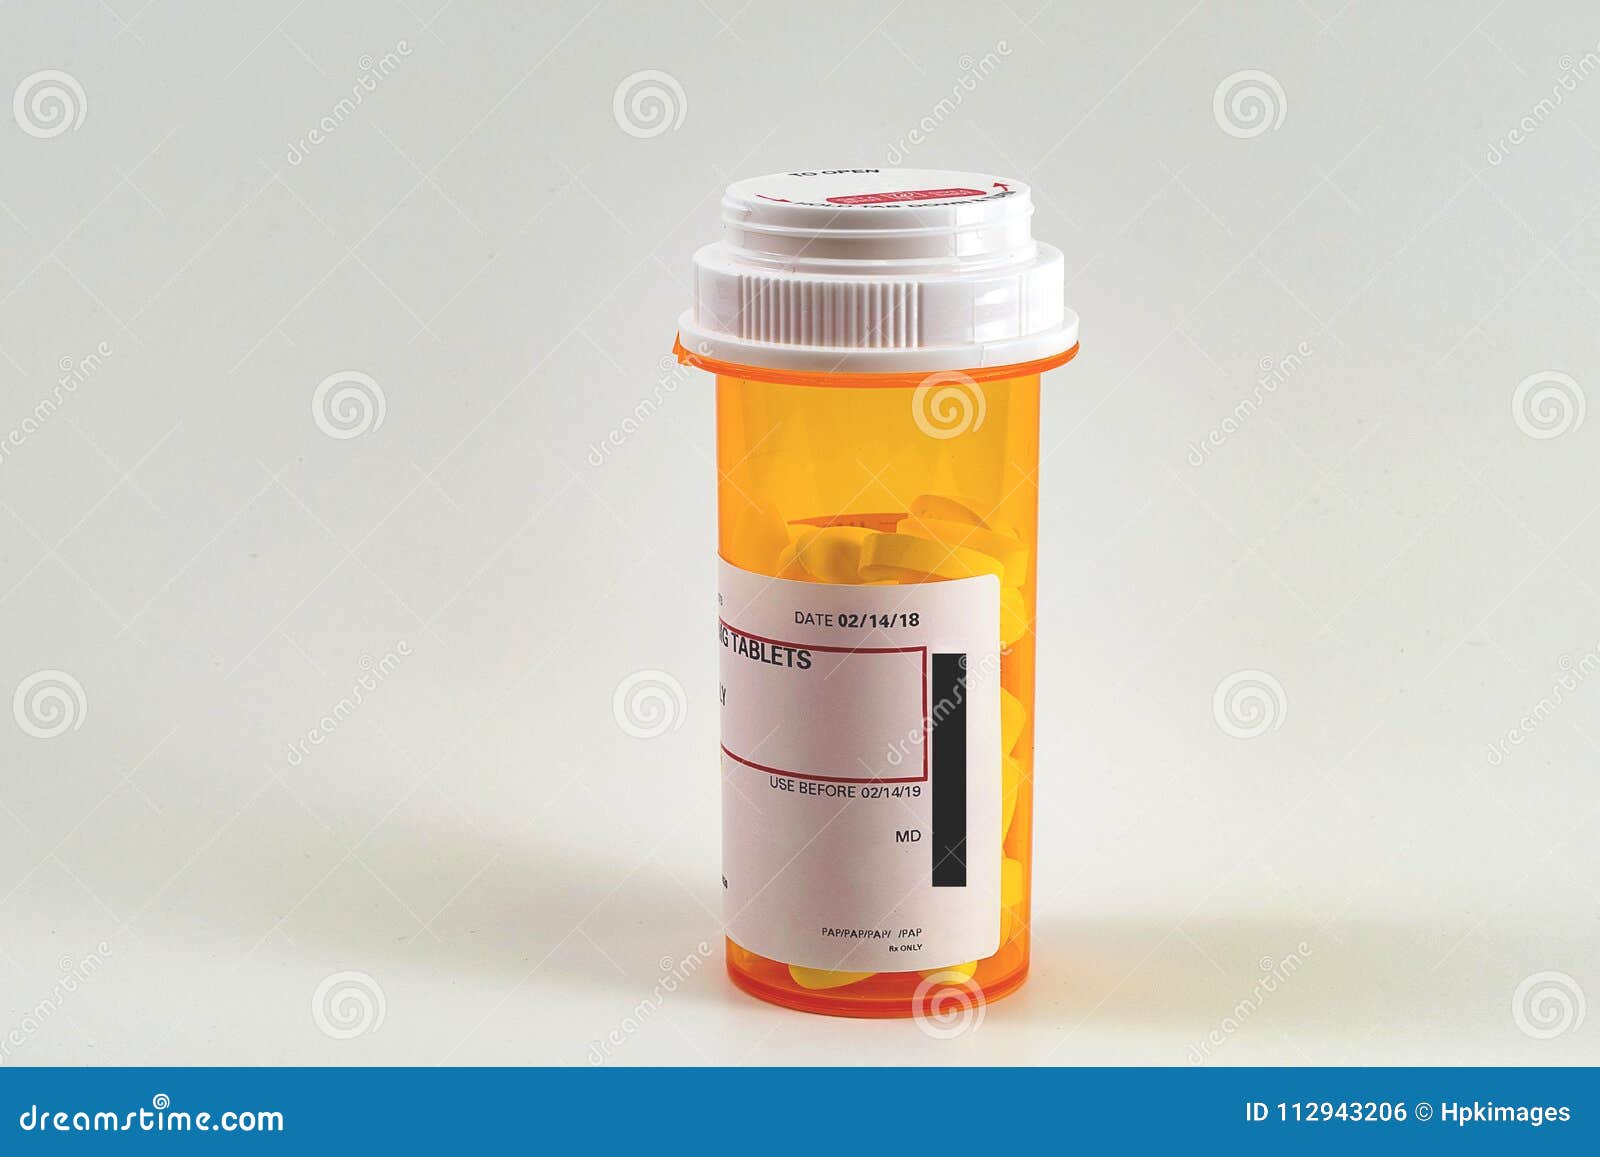 https://thumbs.dreamstime.com/z/medication-pharmacy-child-proof-container-modern-pharmacies-hand-out-containers-most-them-orange-112943206.jpg